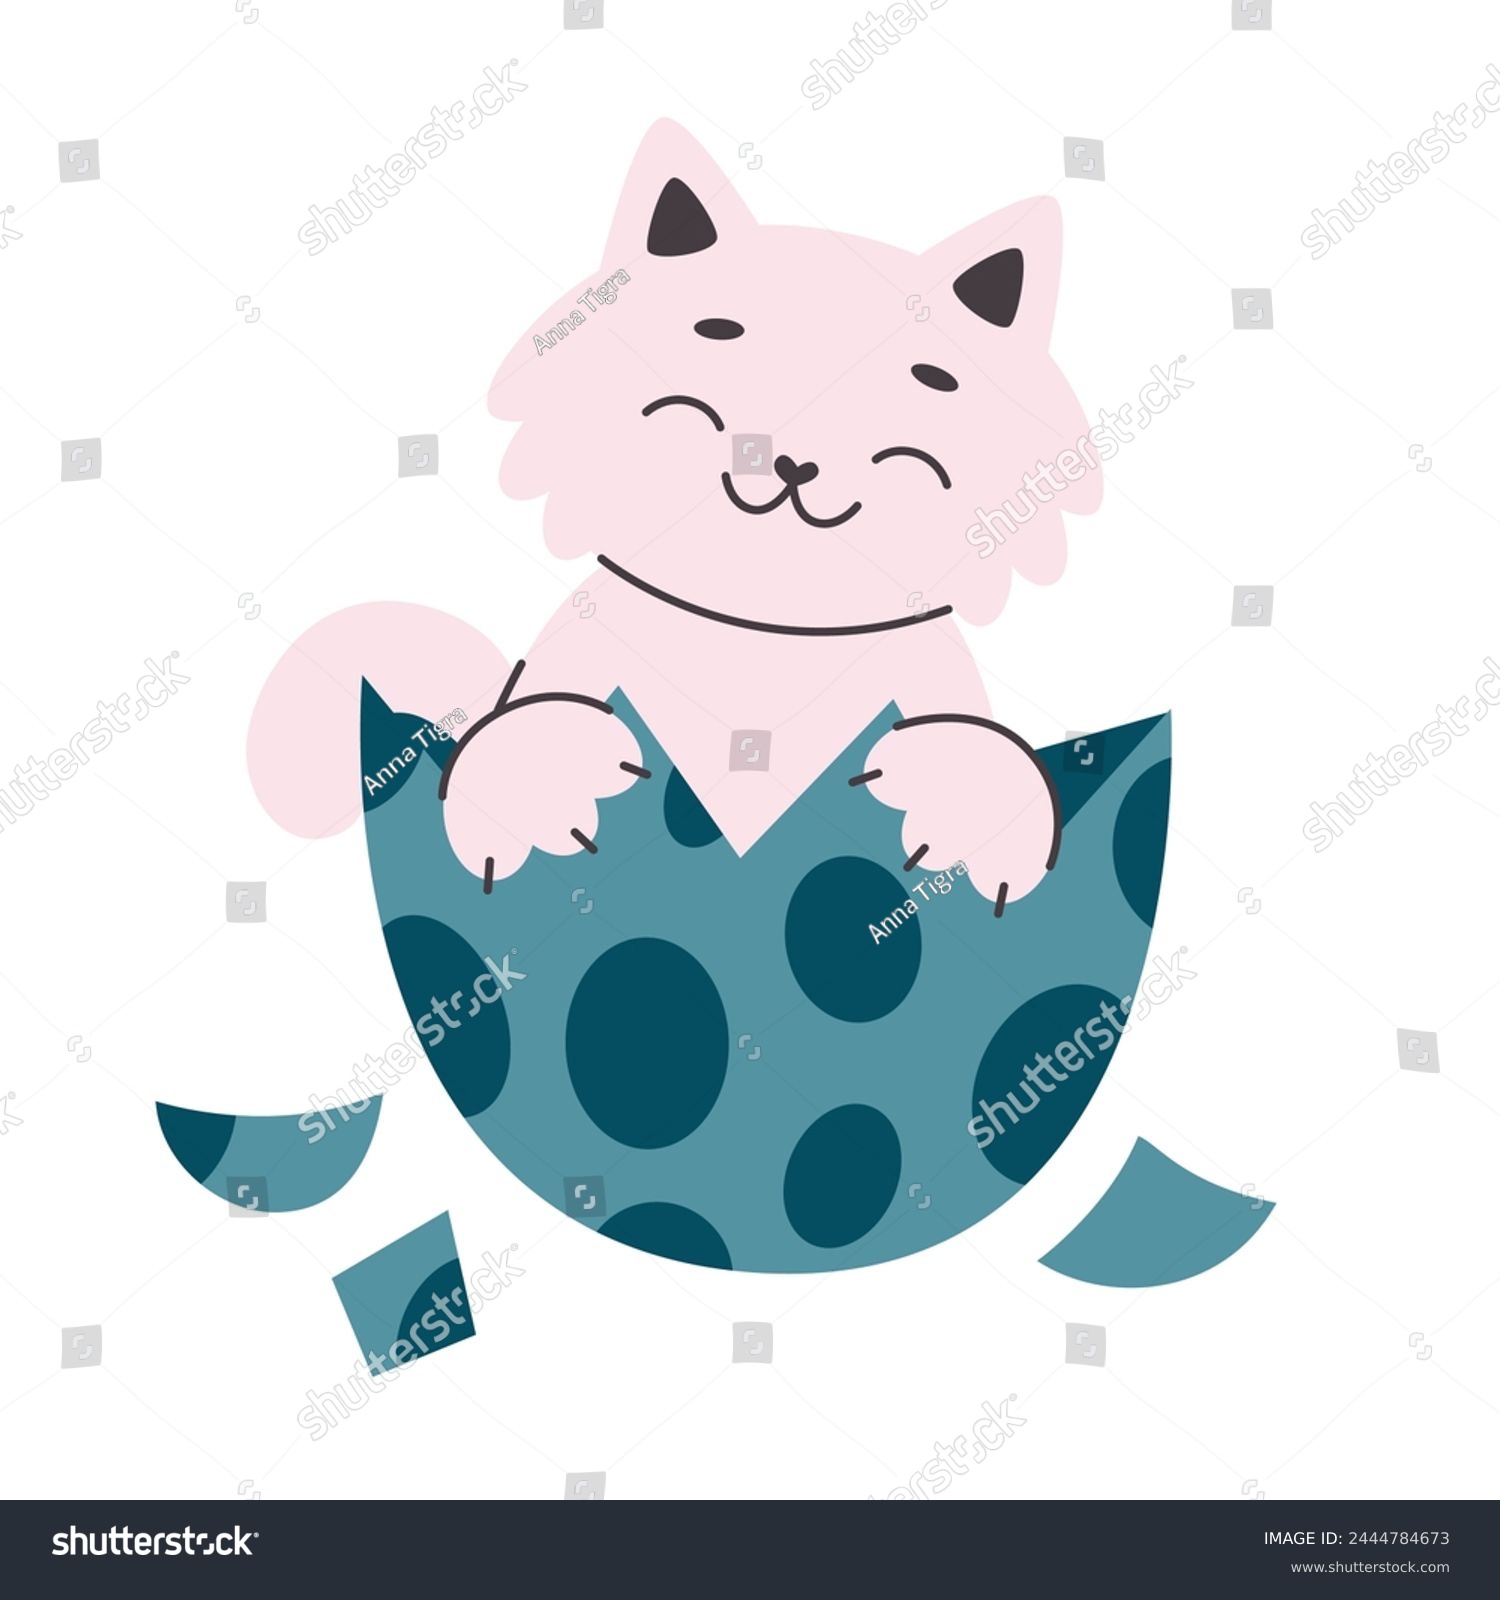 SVG of Cute smiling cat hatched from a dinosaur egg.Cat sitting in a broken egg.Print.Simple flat vector cartoon illustration svg